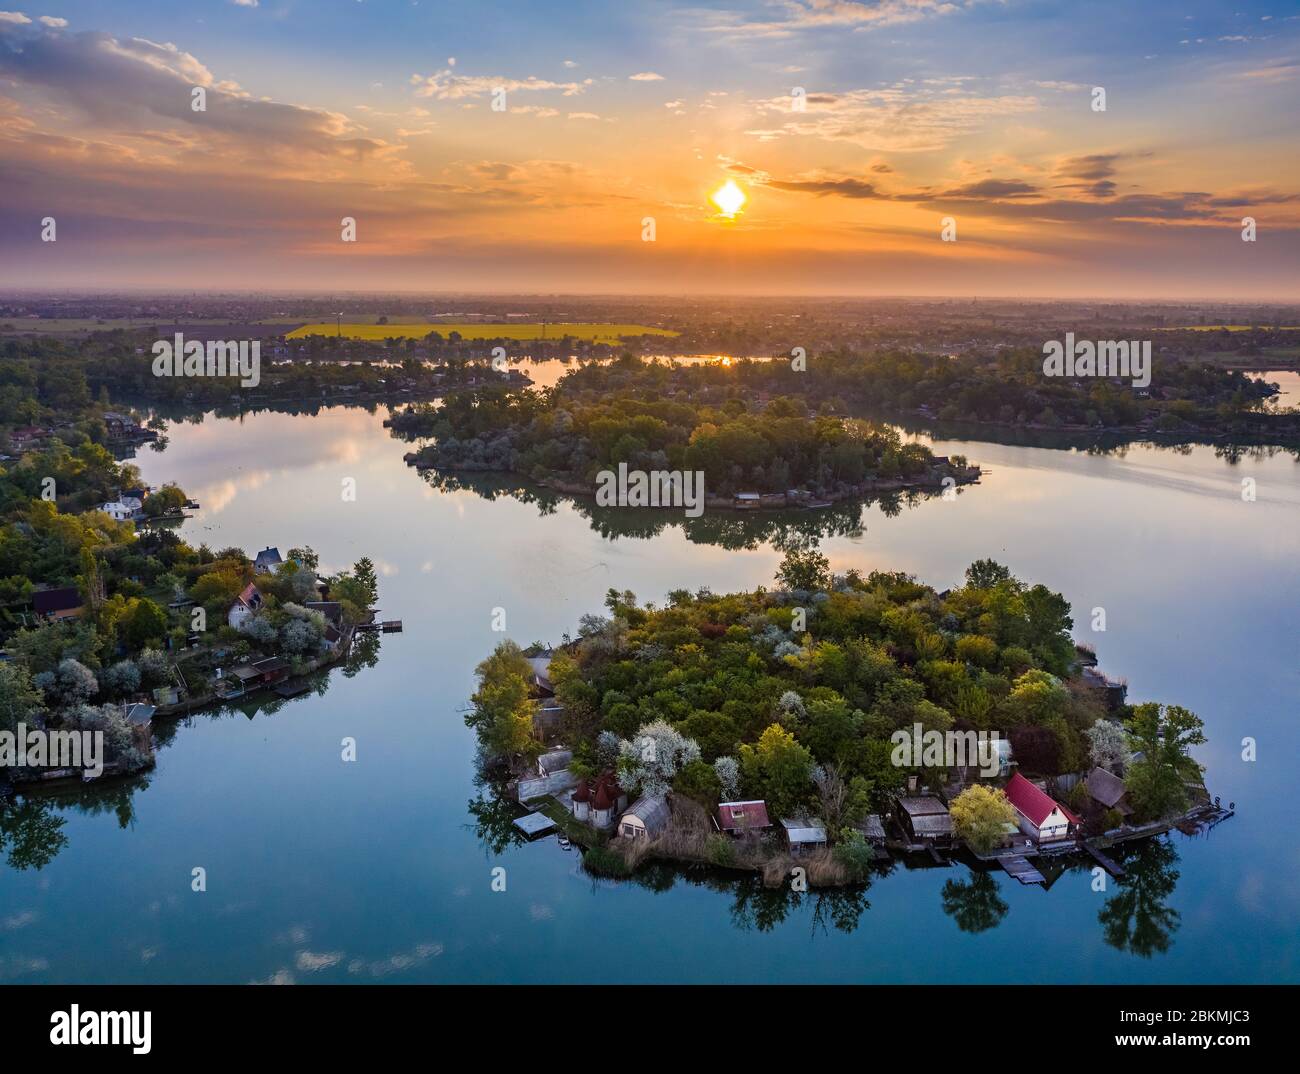 Budapest, Hungary - Aerial view of small fishing island on Lake Kavicsos (Kavicsos to) of Csepel district with a warm sunrise and reflecting clouds. T Stock Photo